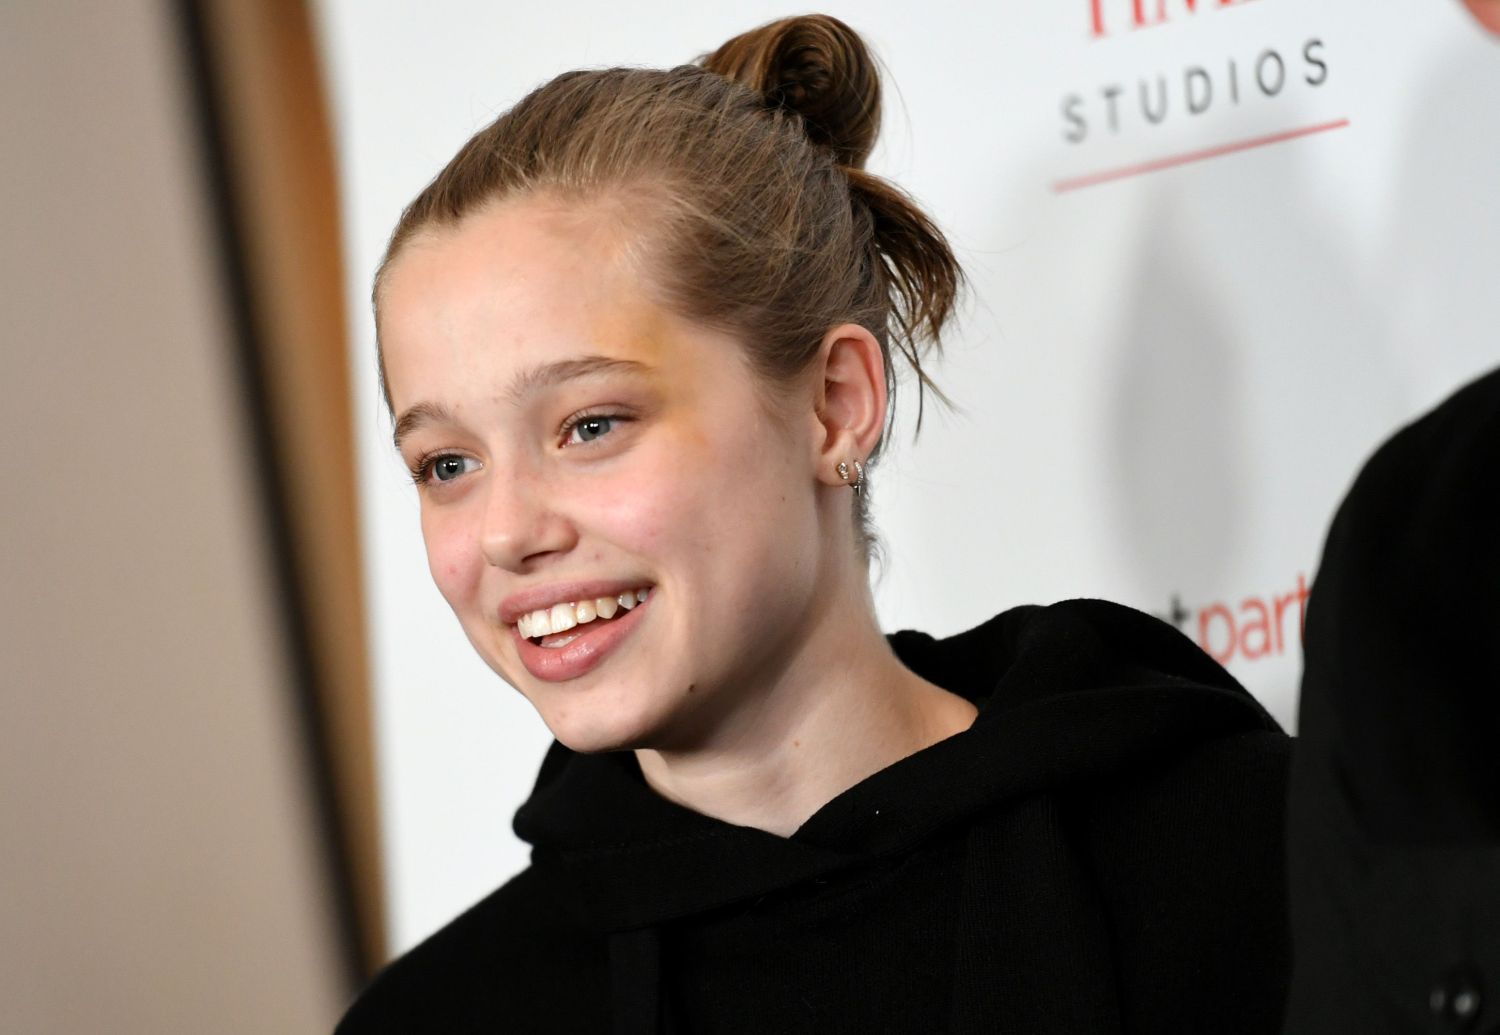 Shiloh Jolie-pitt Wows In Dance Video After Name Change And Reinvention